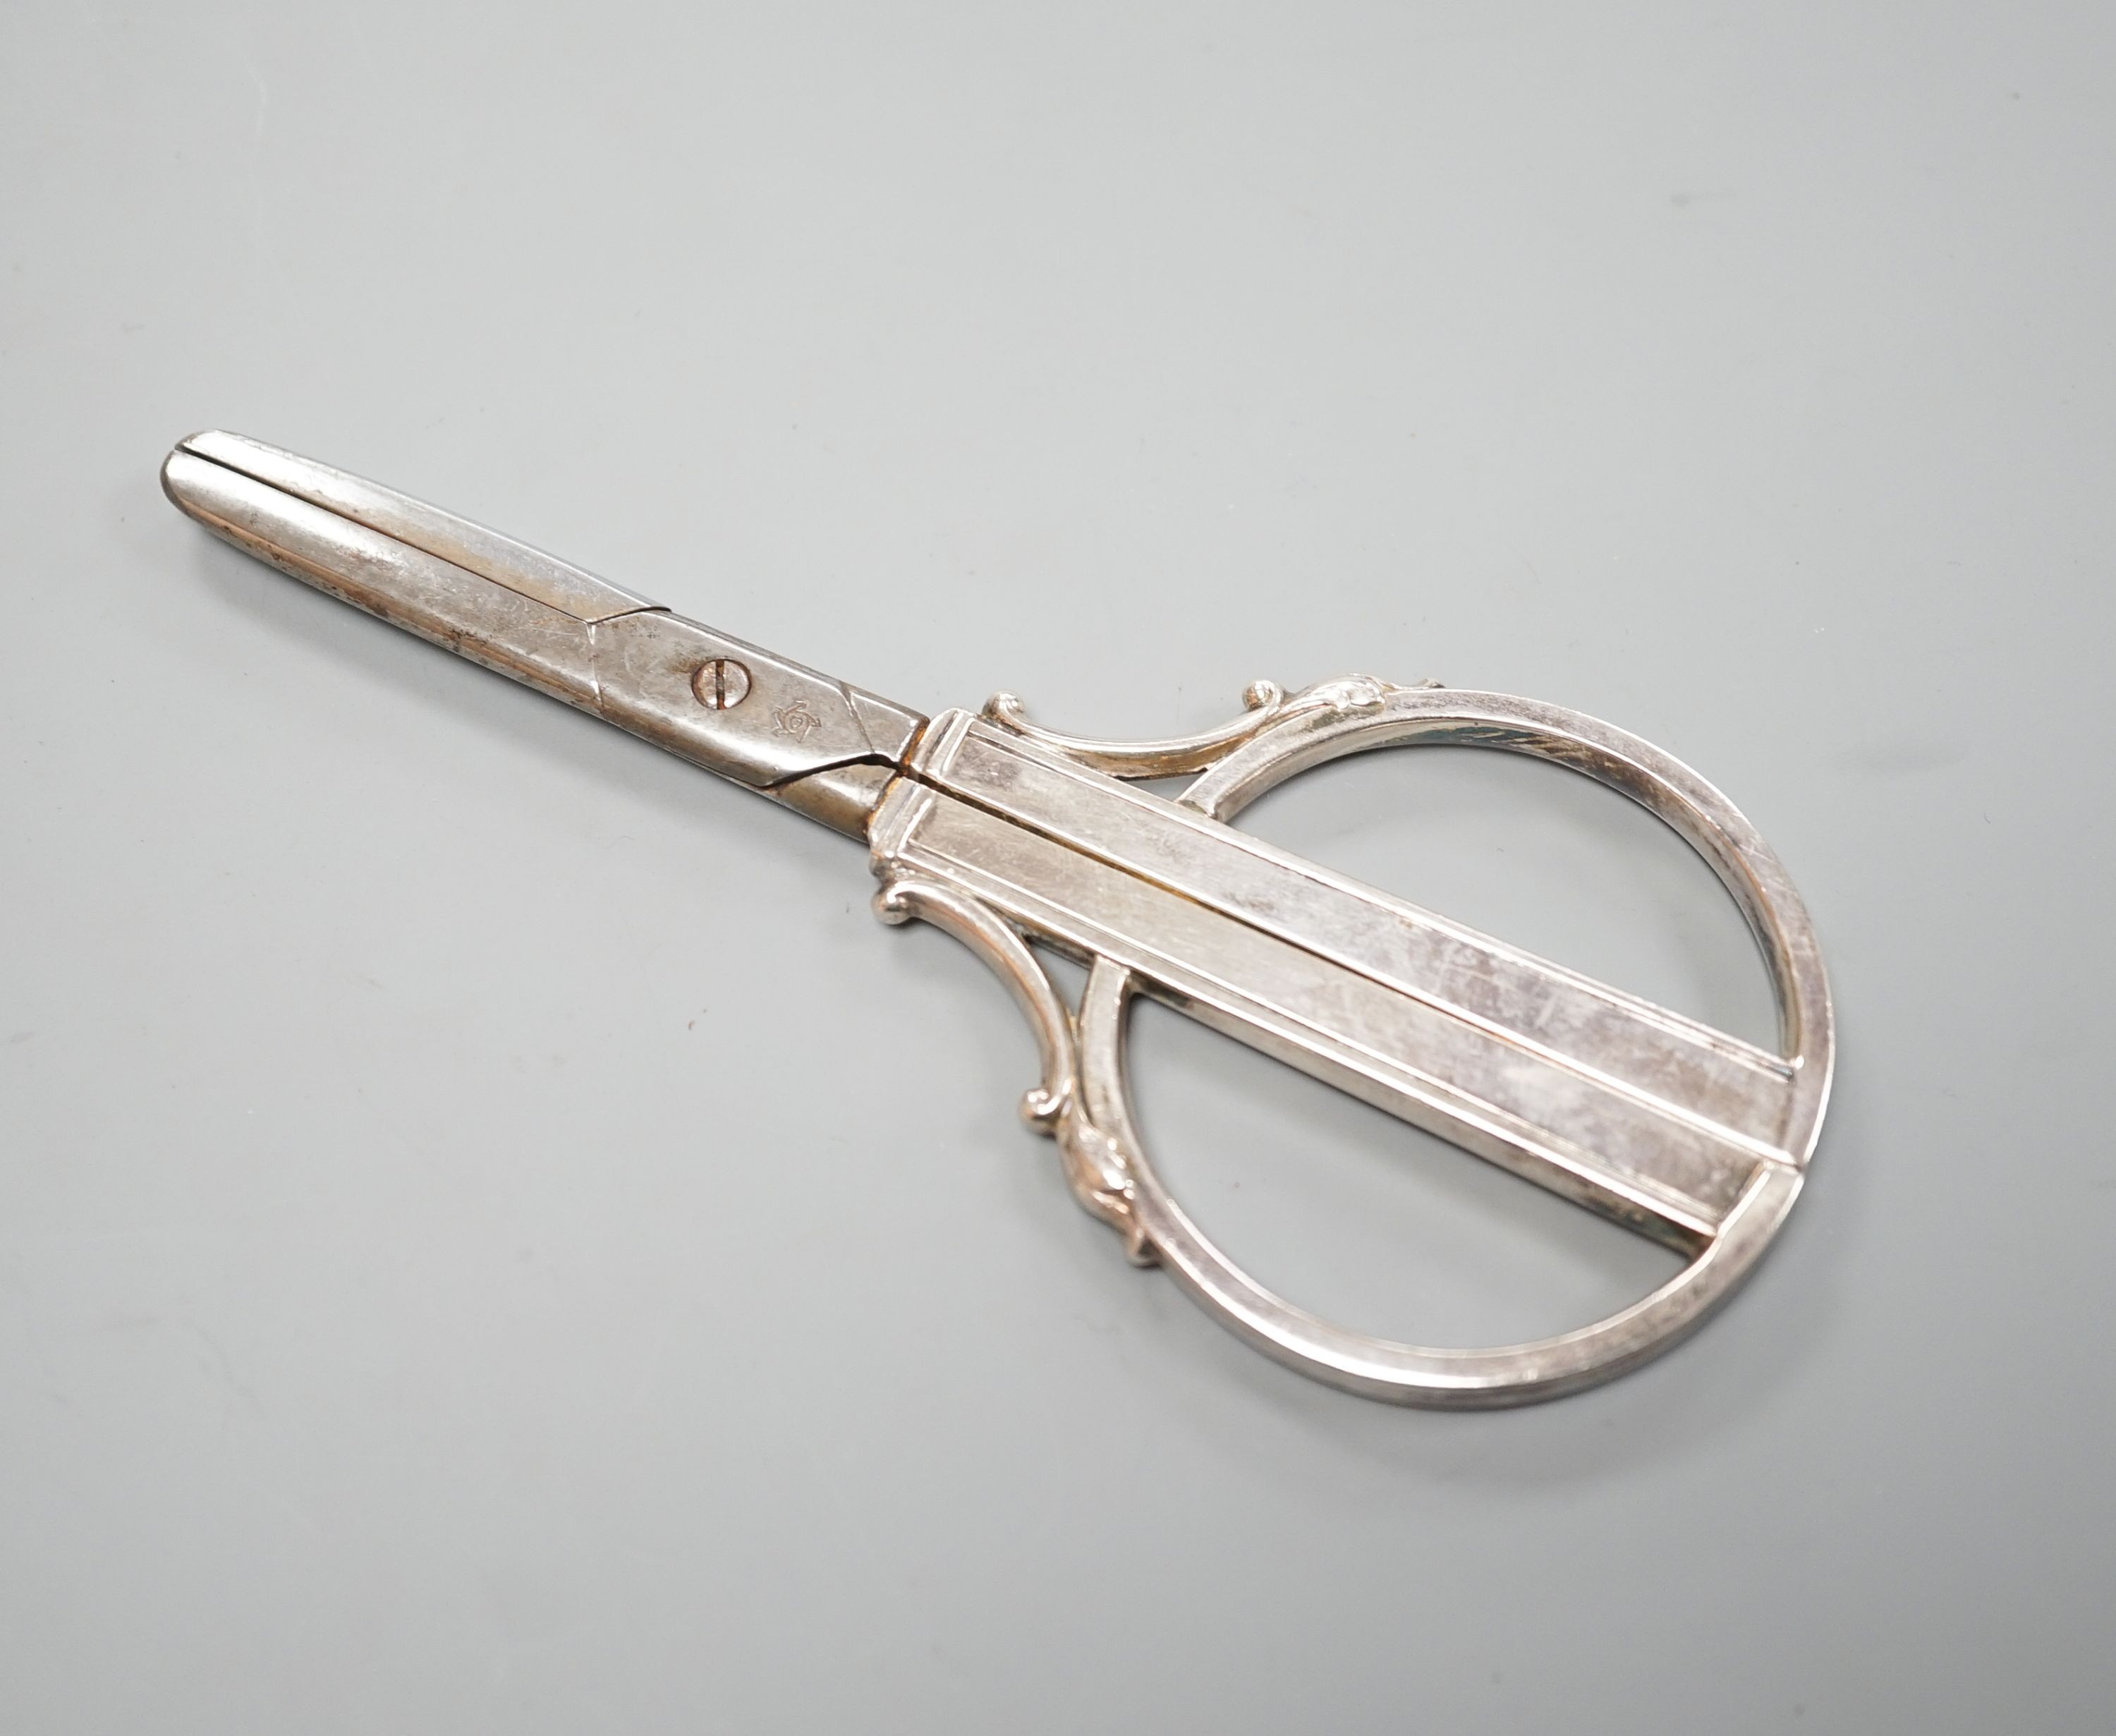 A pair of mid 20th century Danish sterling and steel scissors, by Svend Toxvaerd, 14.7cm.